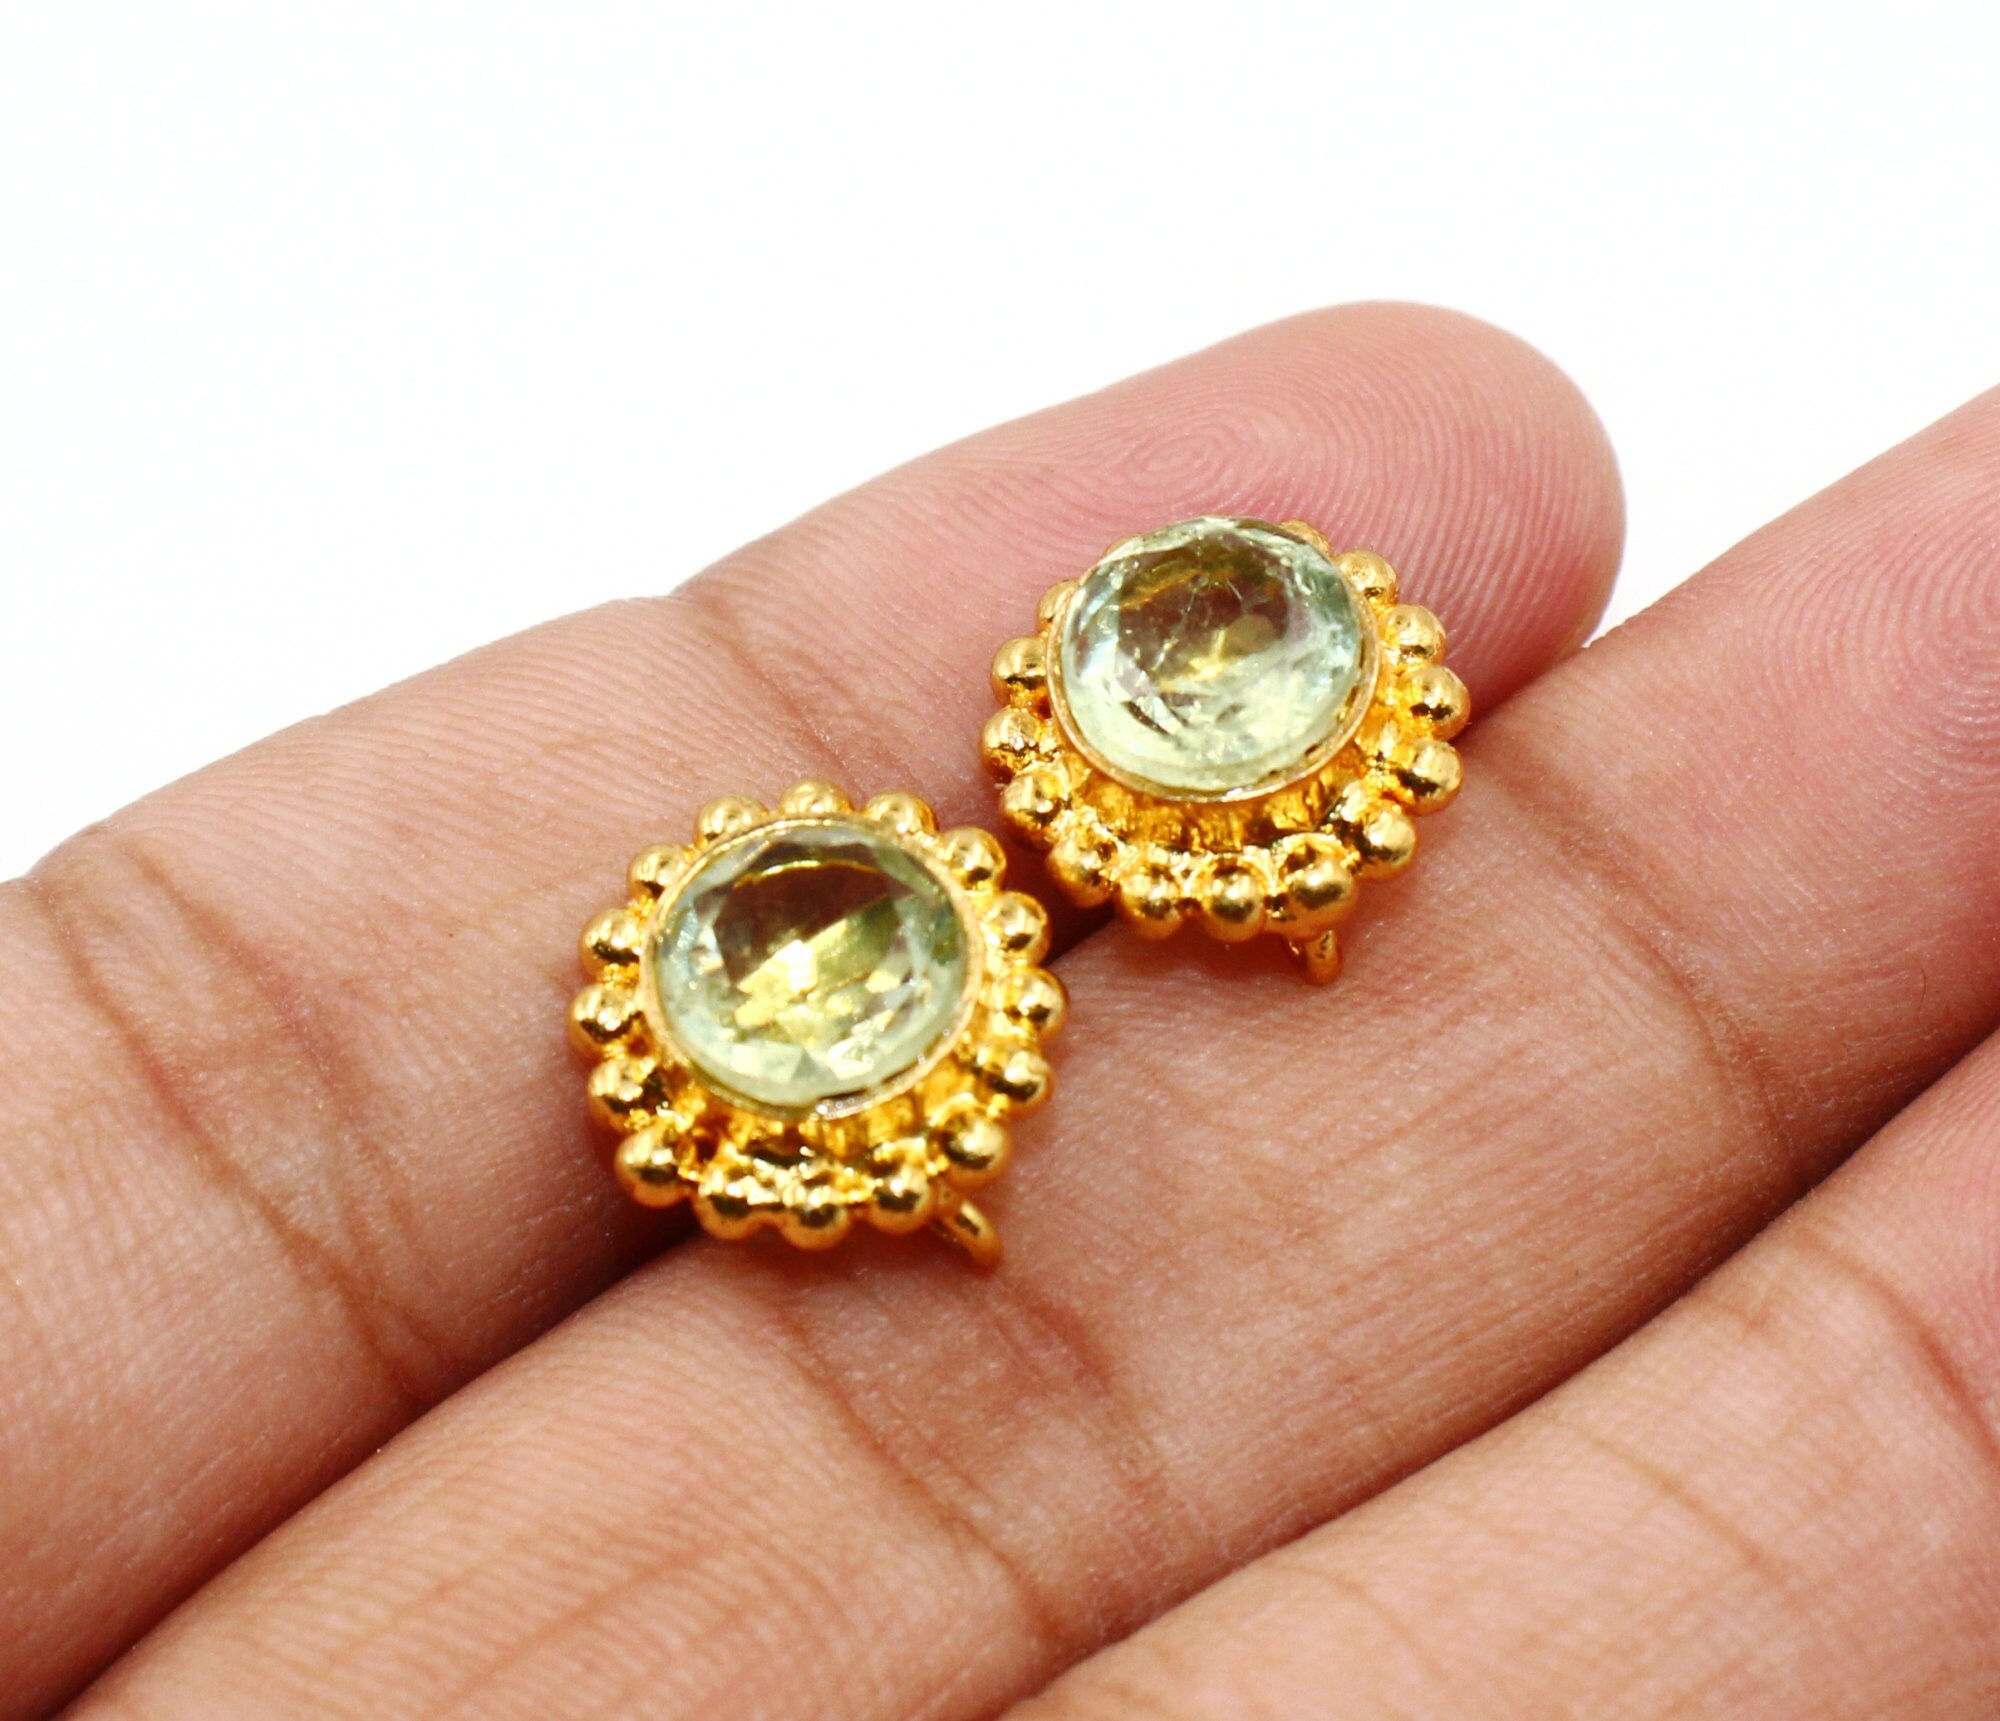 Gold Plated Round Connector Post Stud / Hammered Earring Connectors / DIY Jewelry  Making / Jewelry Components / Earring Findings / PI09 